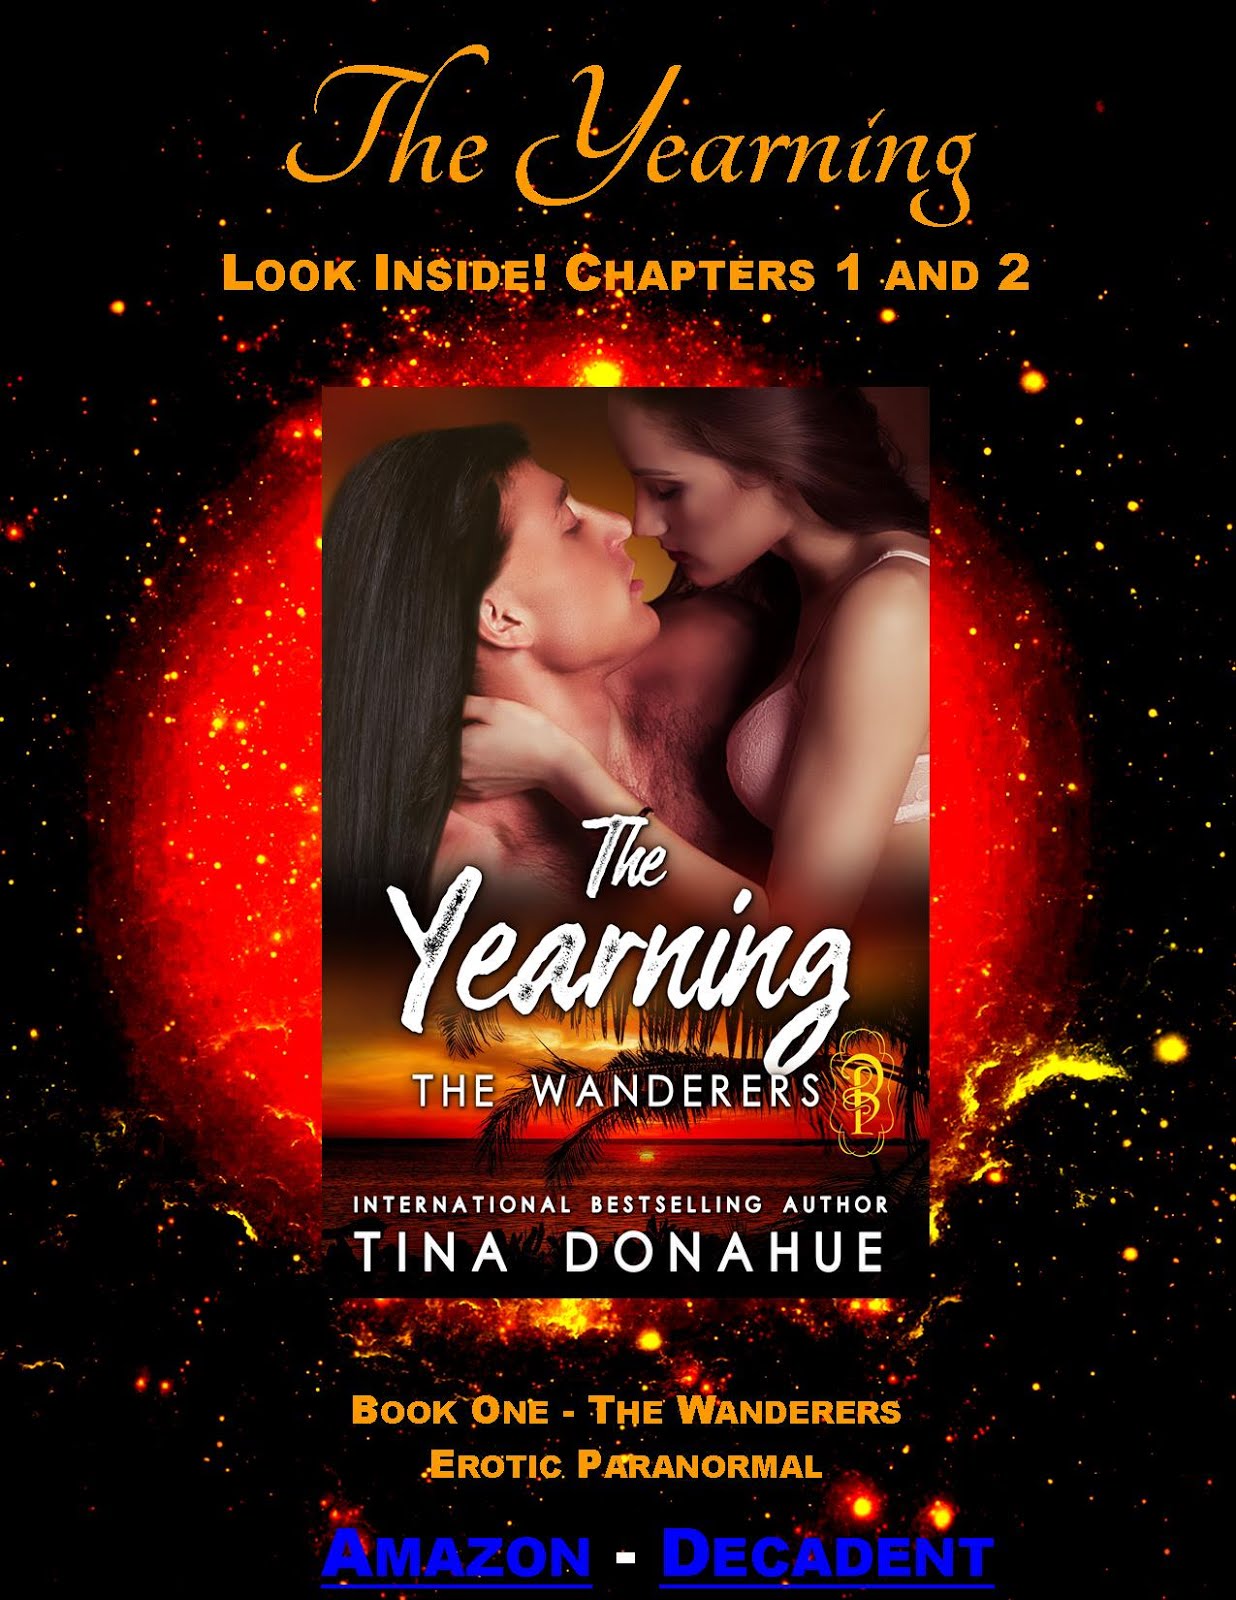 The Yearning - book 1 The Wanderers